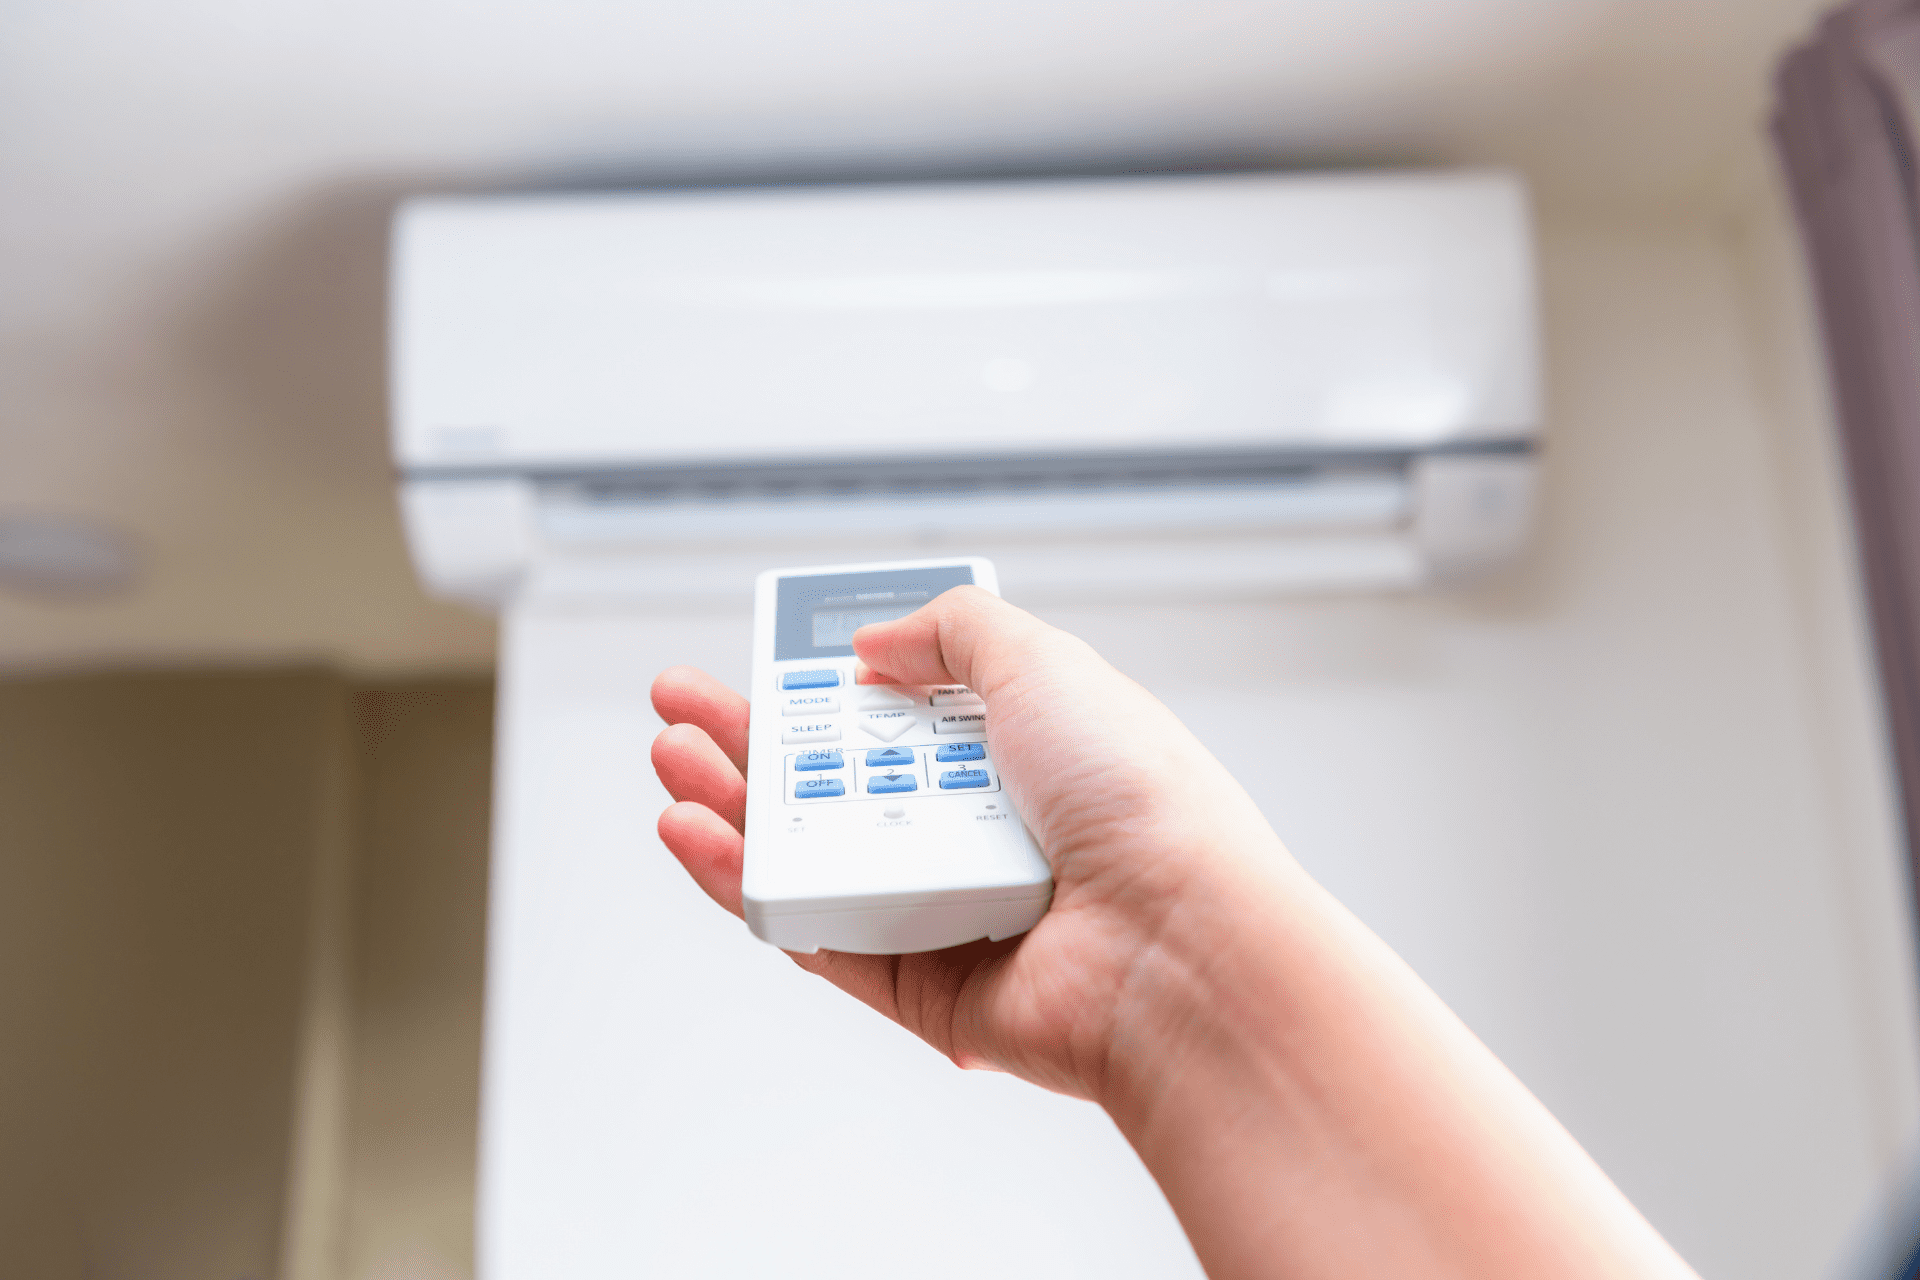 What is a Ductless Air Conditioner?